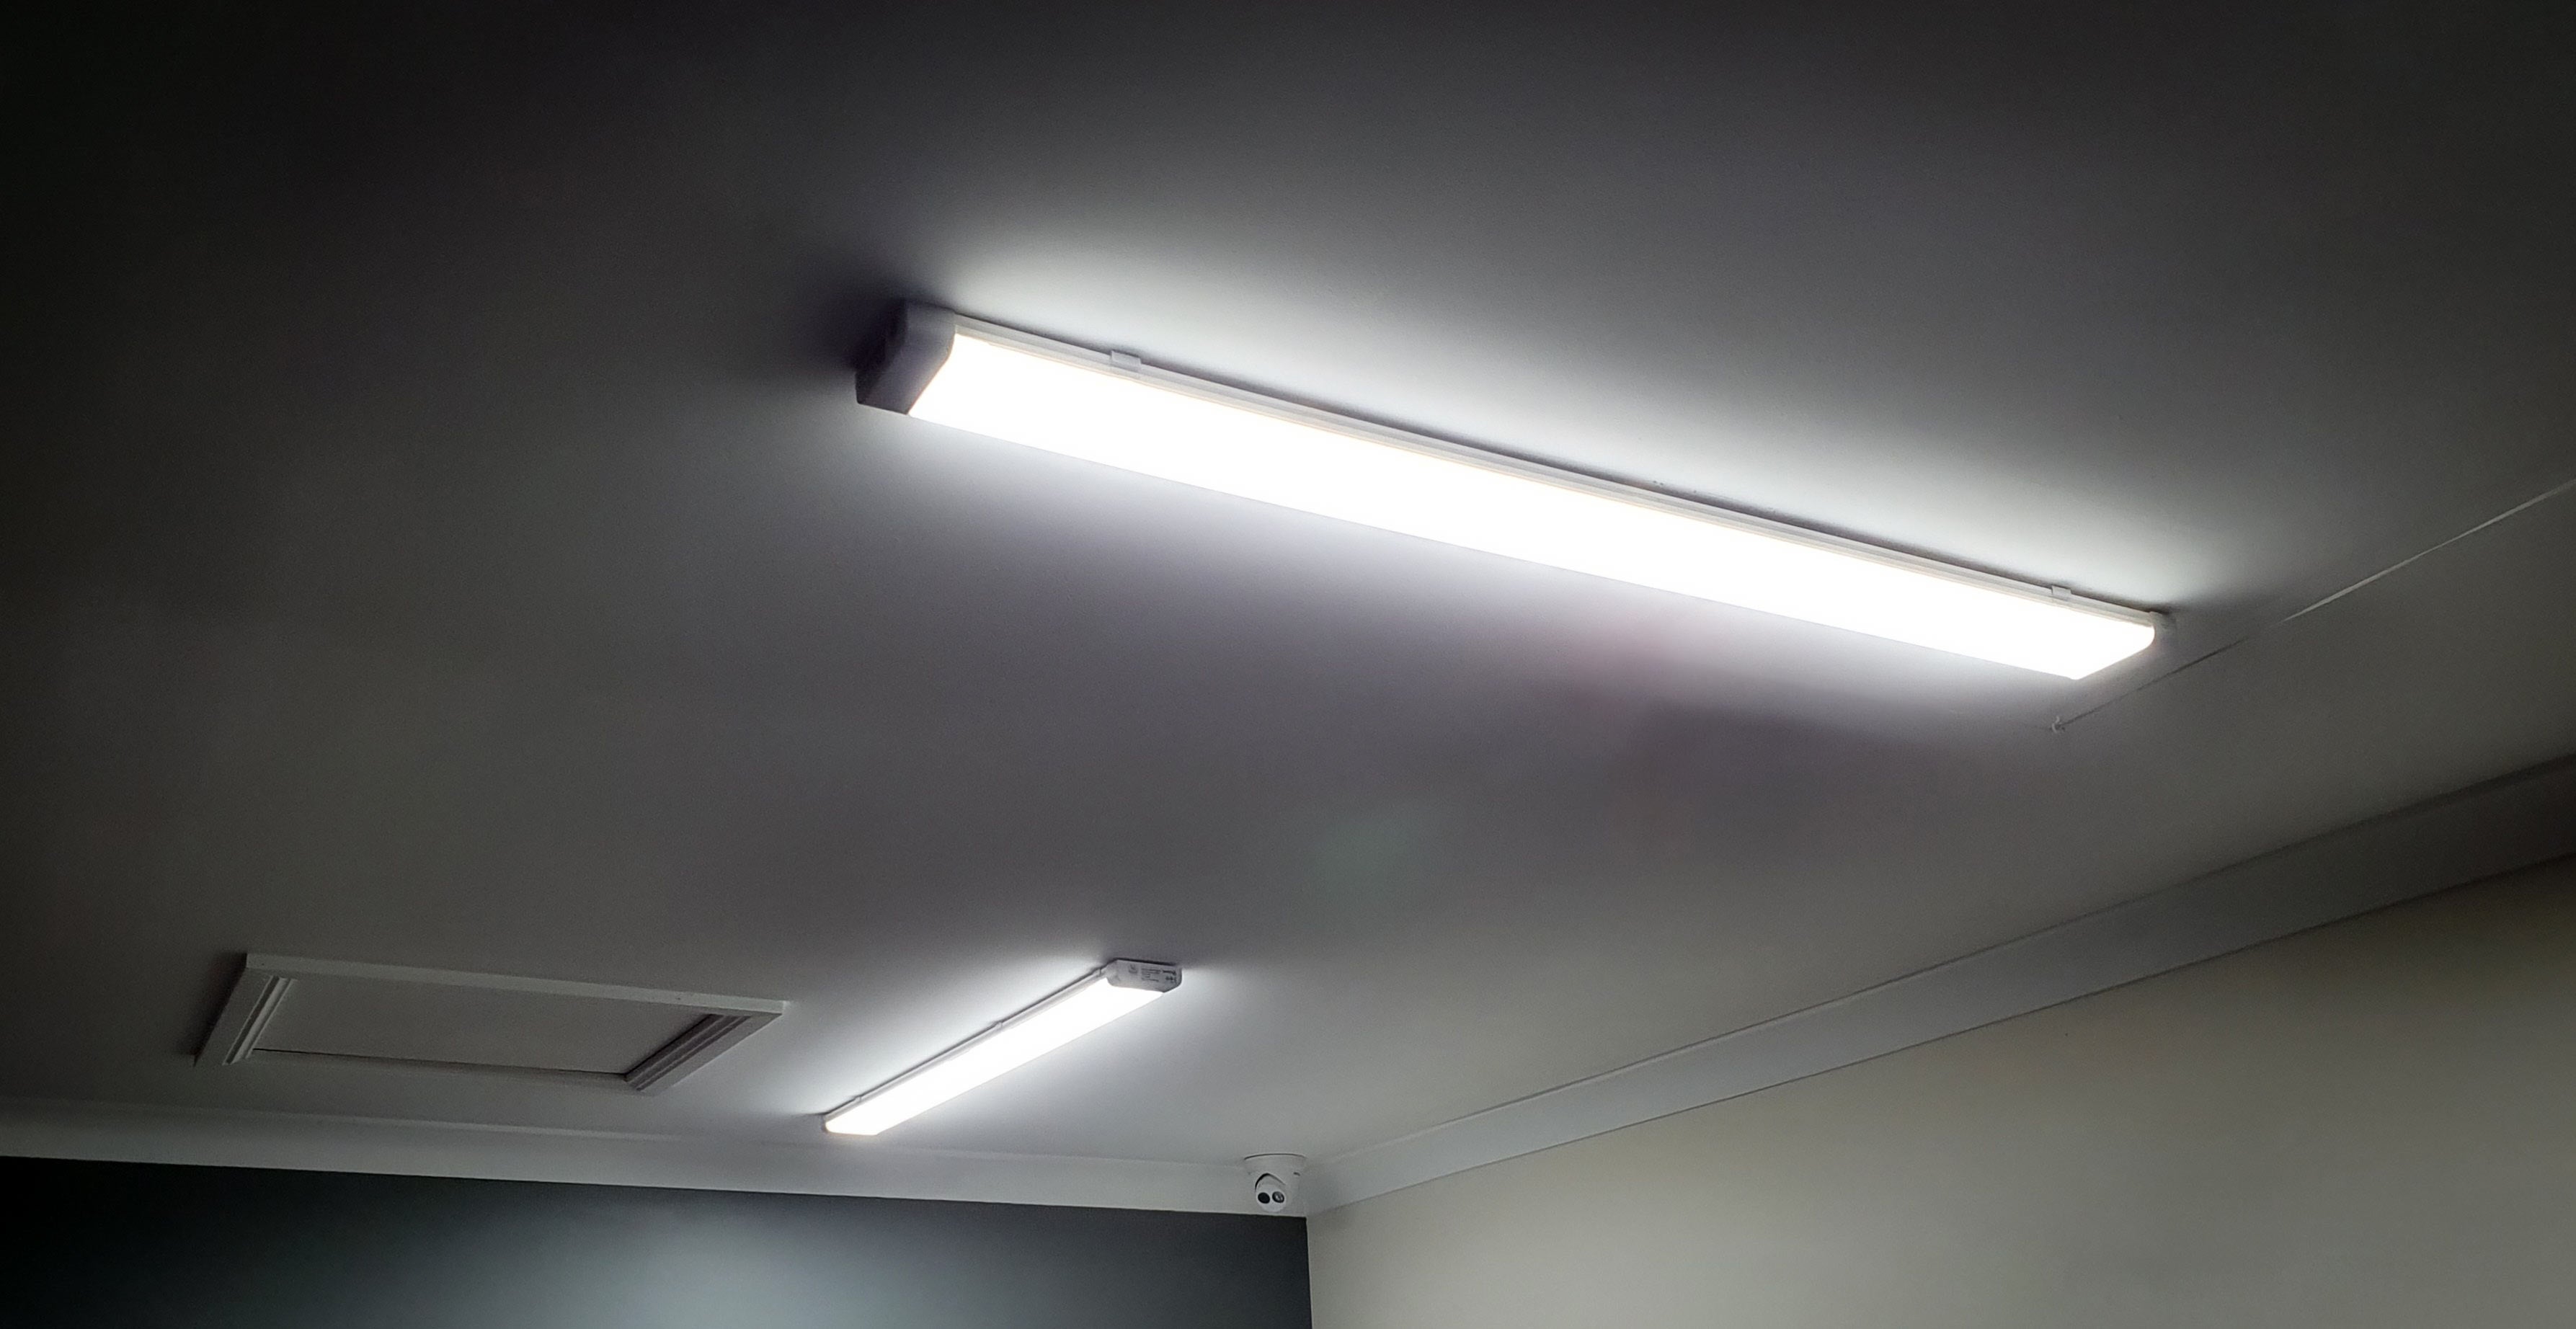 What You Need To Know About LED Downlights